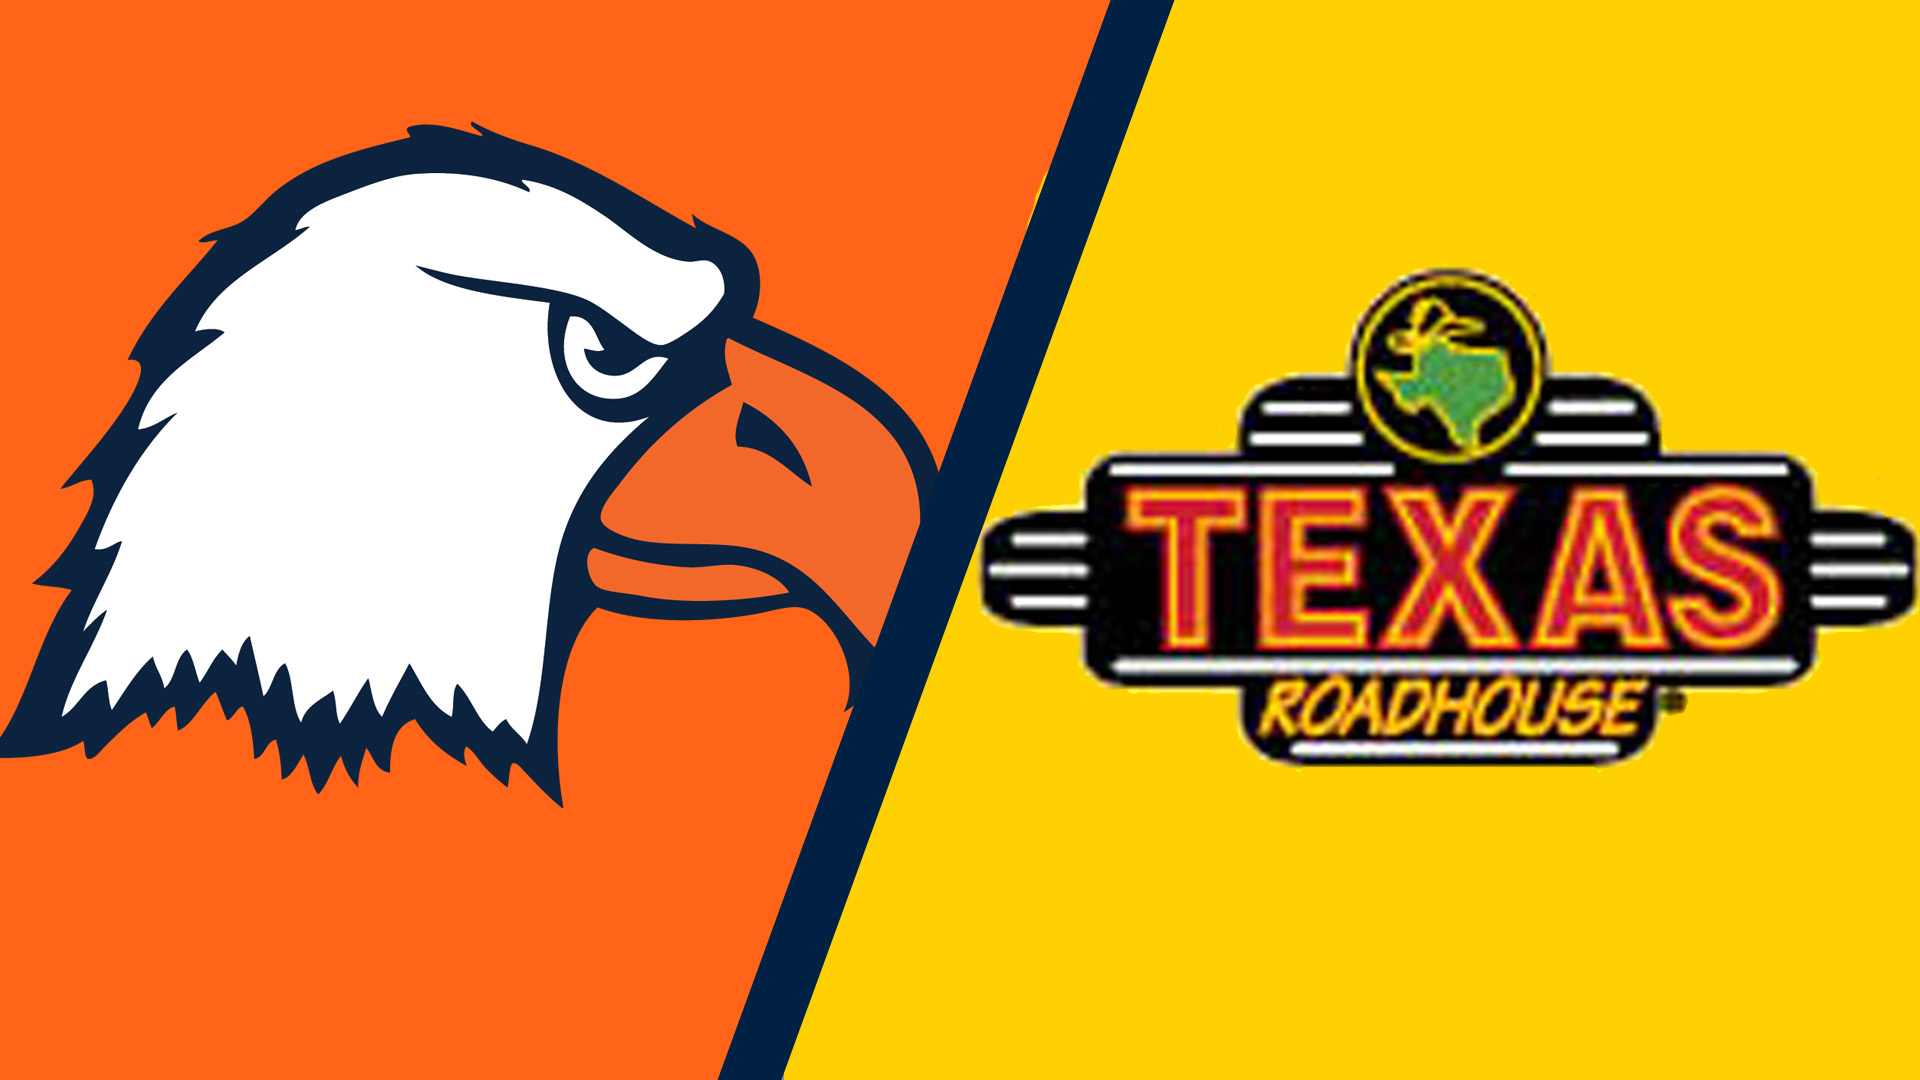 Texas Roadhouse partners with Carson-Newman to offer free student tailgate